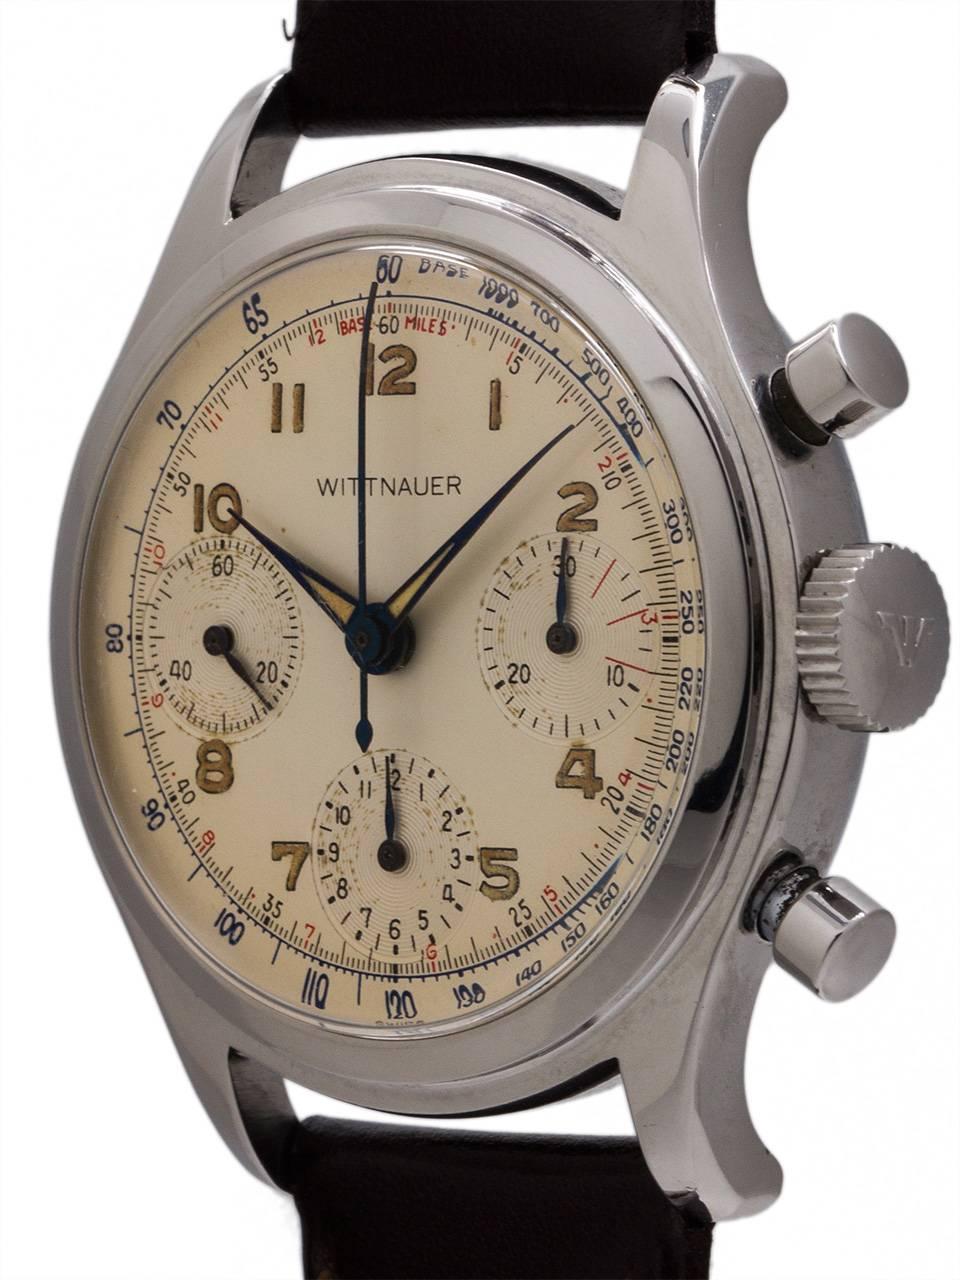 
Great looking vintage Wittnauer 3 registers manual wind chronograph with very pleasing original dial circa 1959. Great looking all original cream color dial with luminous arabic indexes, inner 12 hour scale in red, outer tachometer scale and with